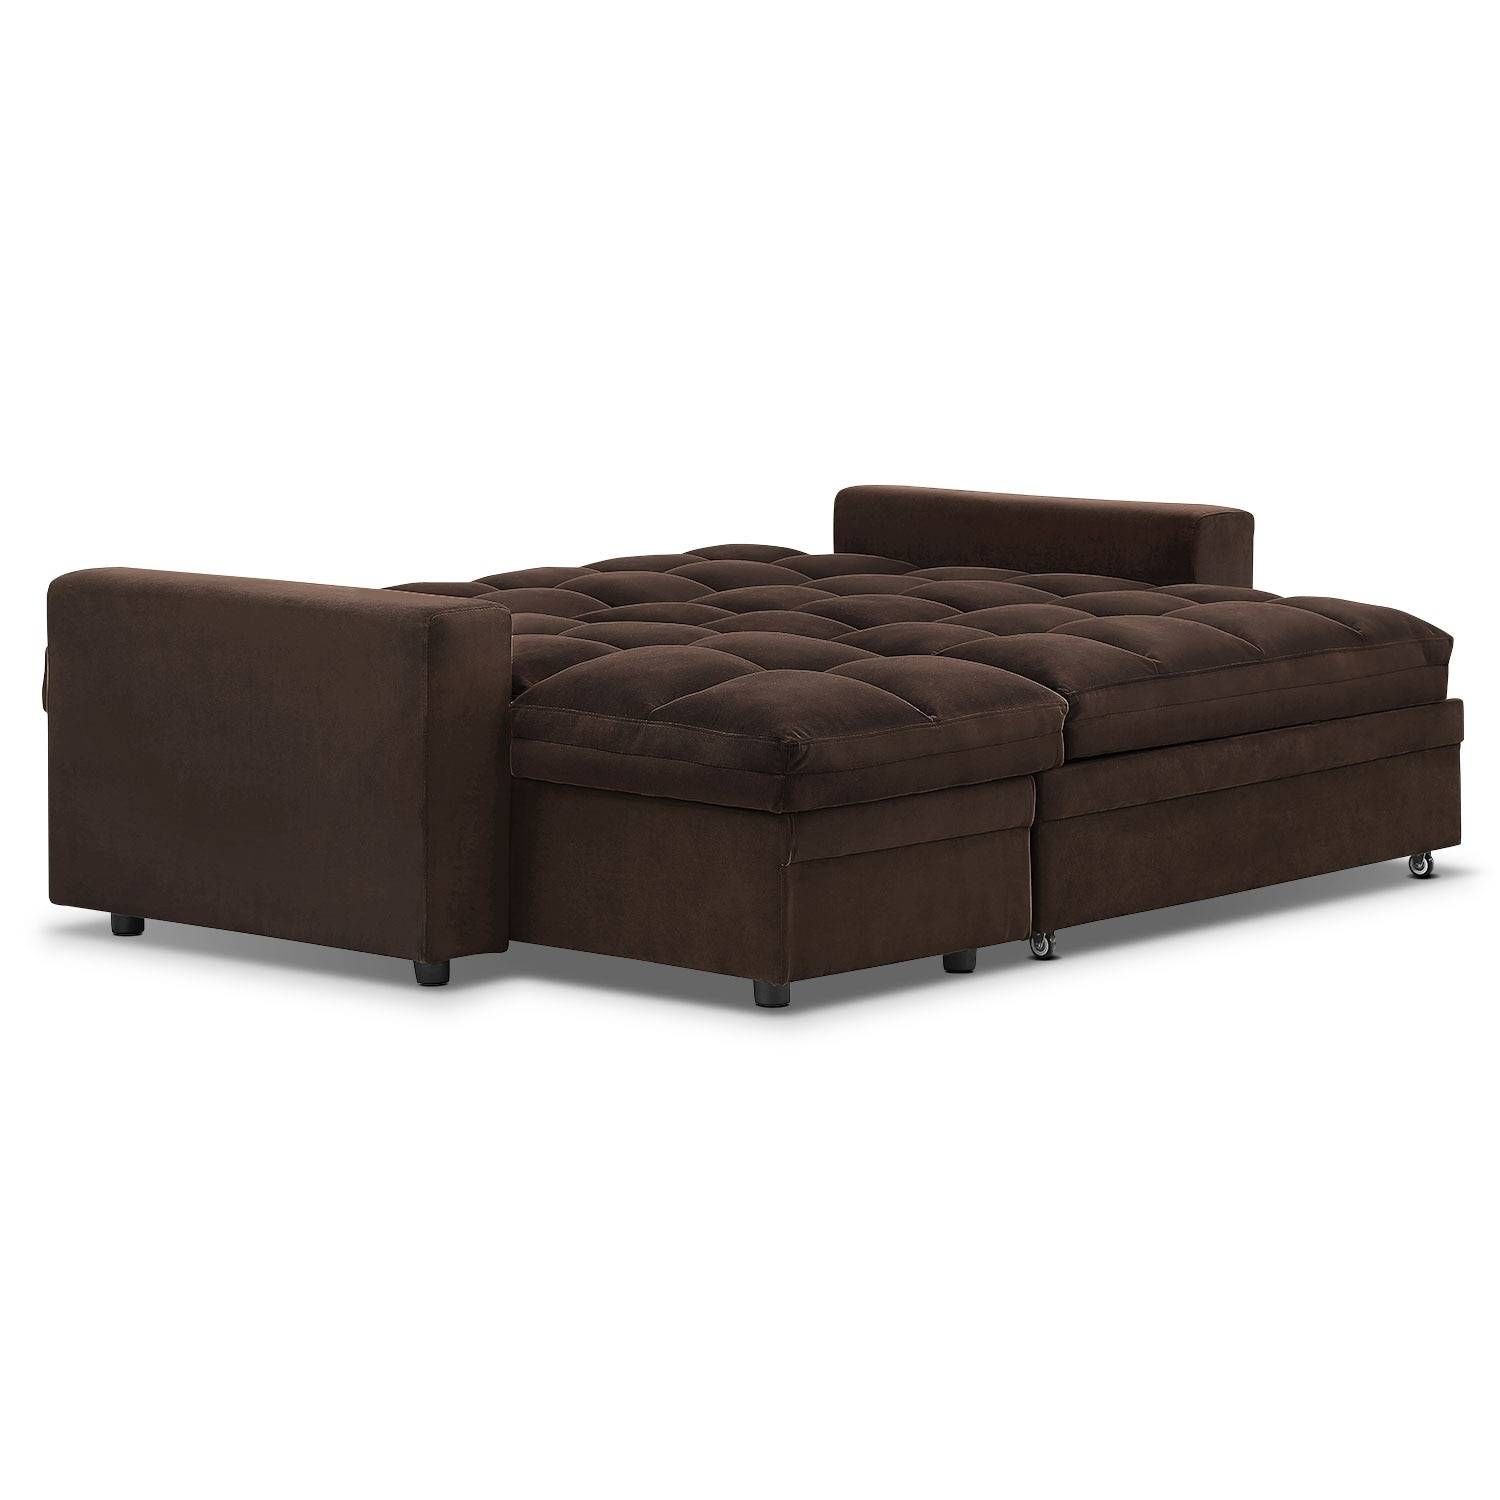 Metro Chaise Sofa Bed With Storage – Brown | Value City Furniture With Regard To Chaise Sofa Beds With Storage (View 13 of 15)